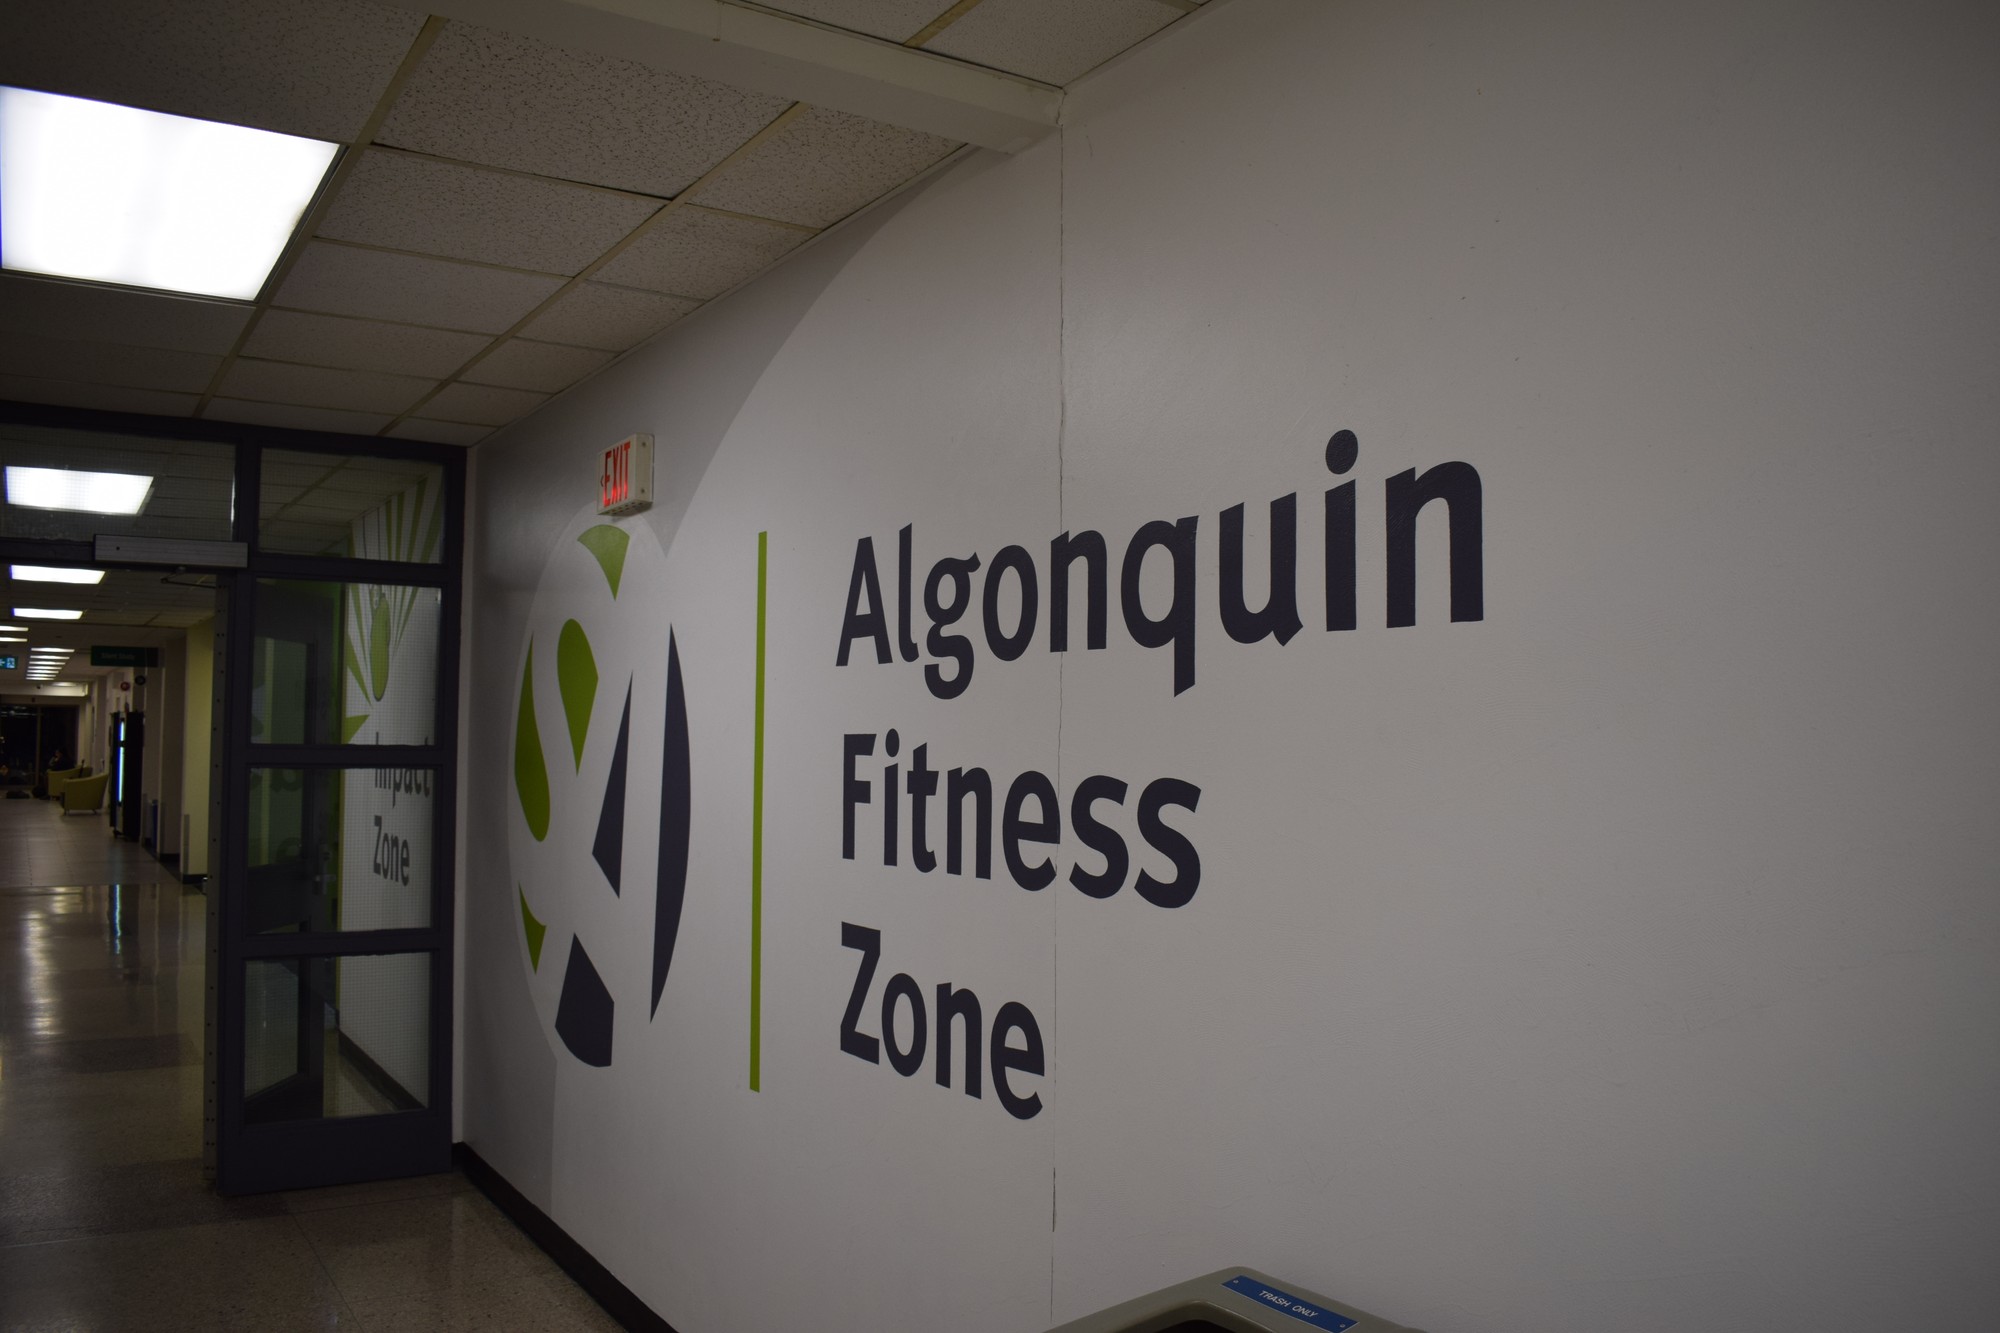 The Algonquin Fitness Zone has closed again due to a recent spike in COVID-19 cases, and the City of Ottawa entering a modified stage two phase.